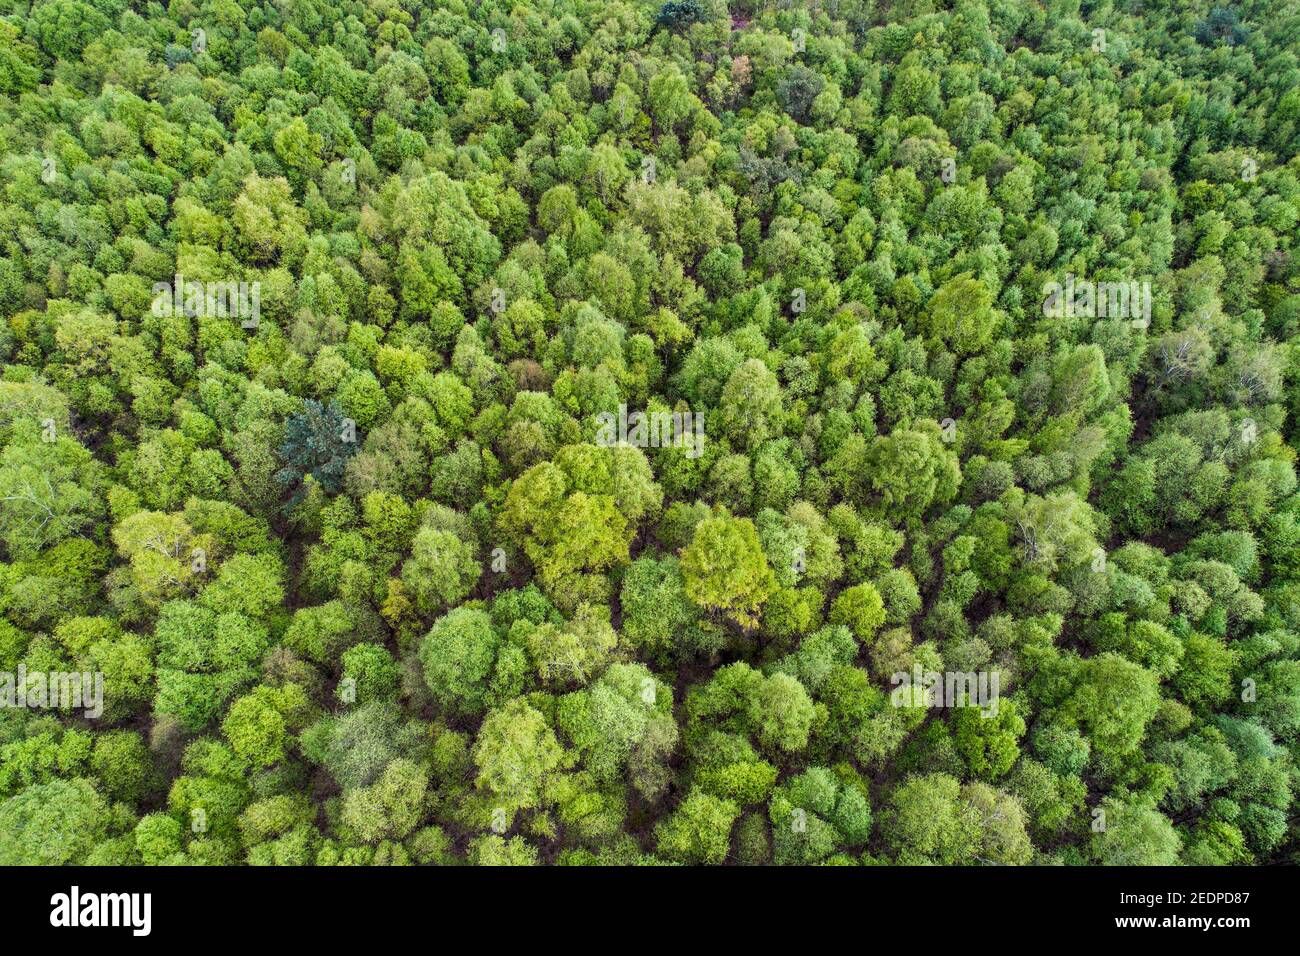 Goldenstedt moor, aerial view, Germany, Lower Saxony, Goldenstedt Stock Photo